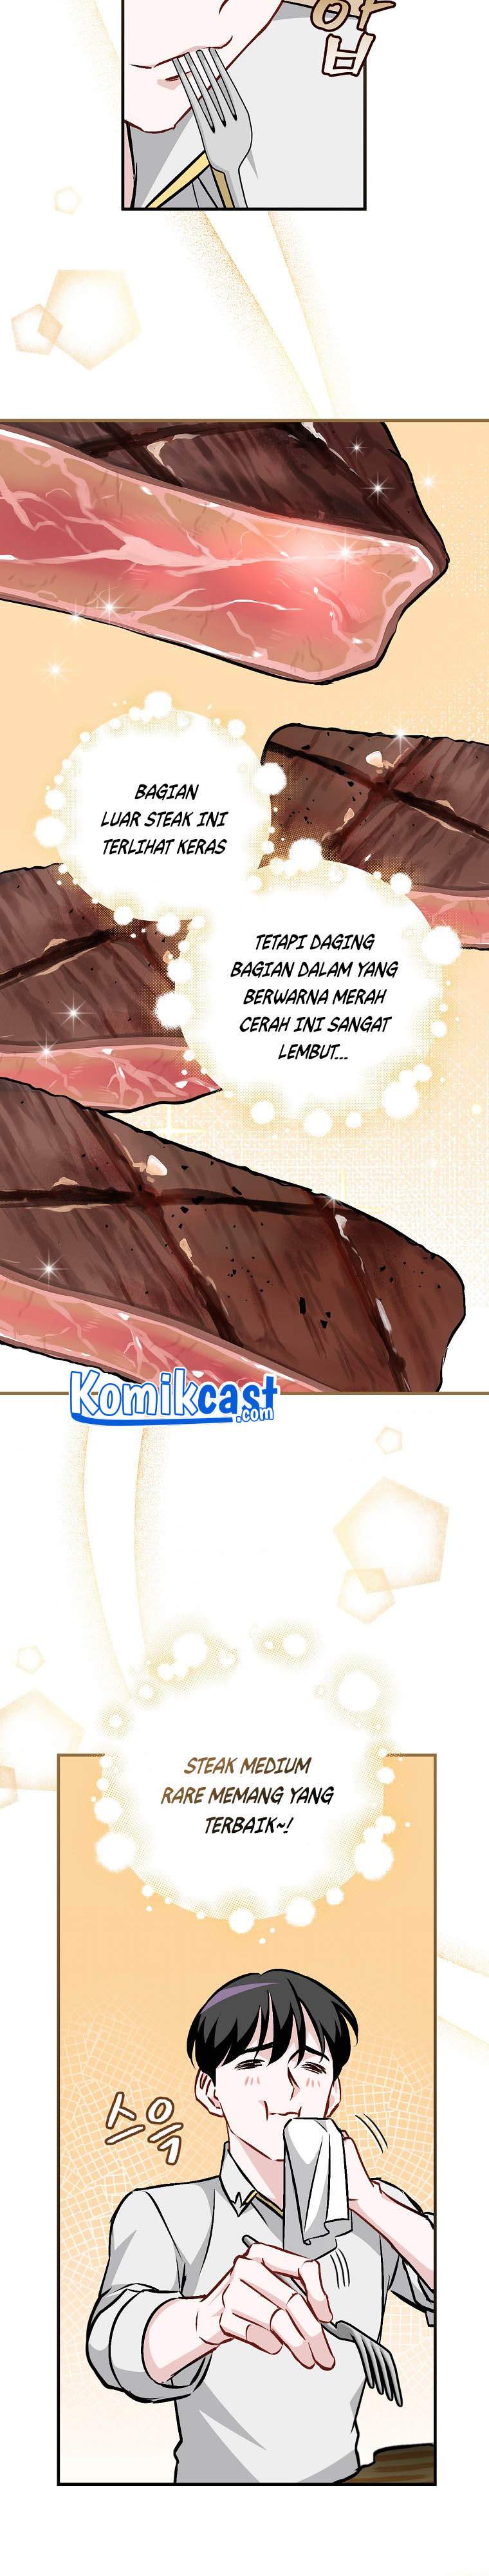 Leveling Up, By Only Eating! (Gourmet Gaming) Chapter 82 - 225